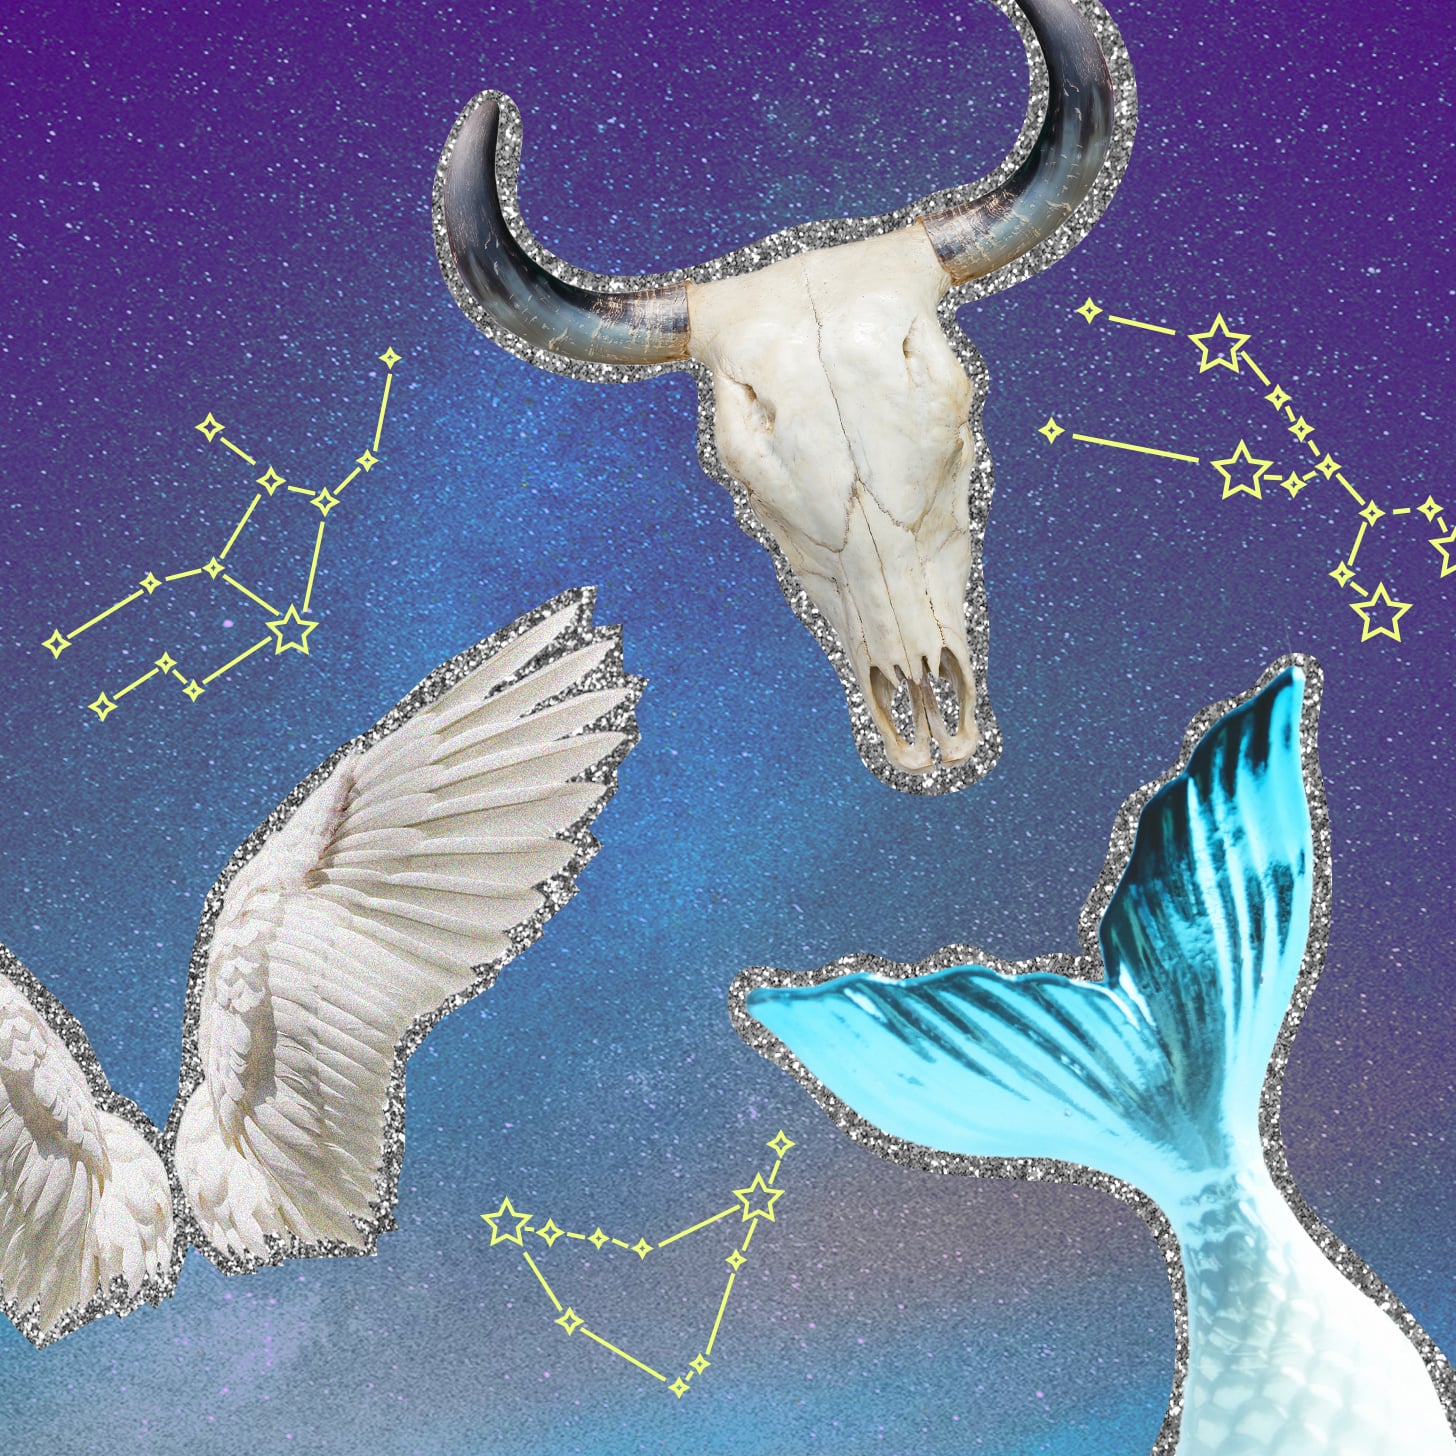 Weekly horoscope for Jan. 8, 2023